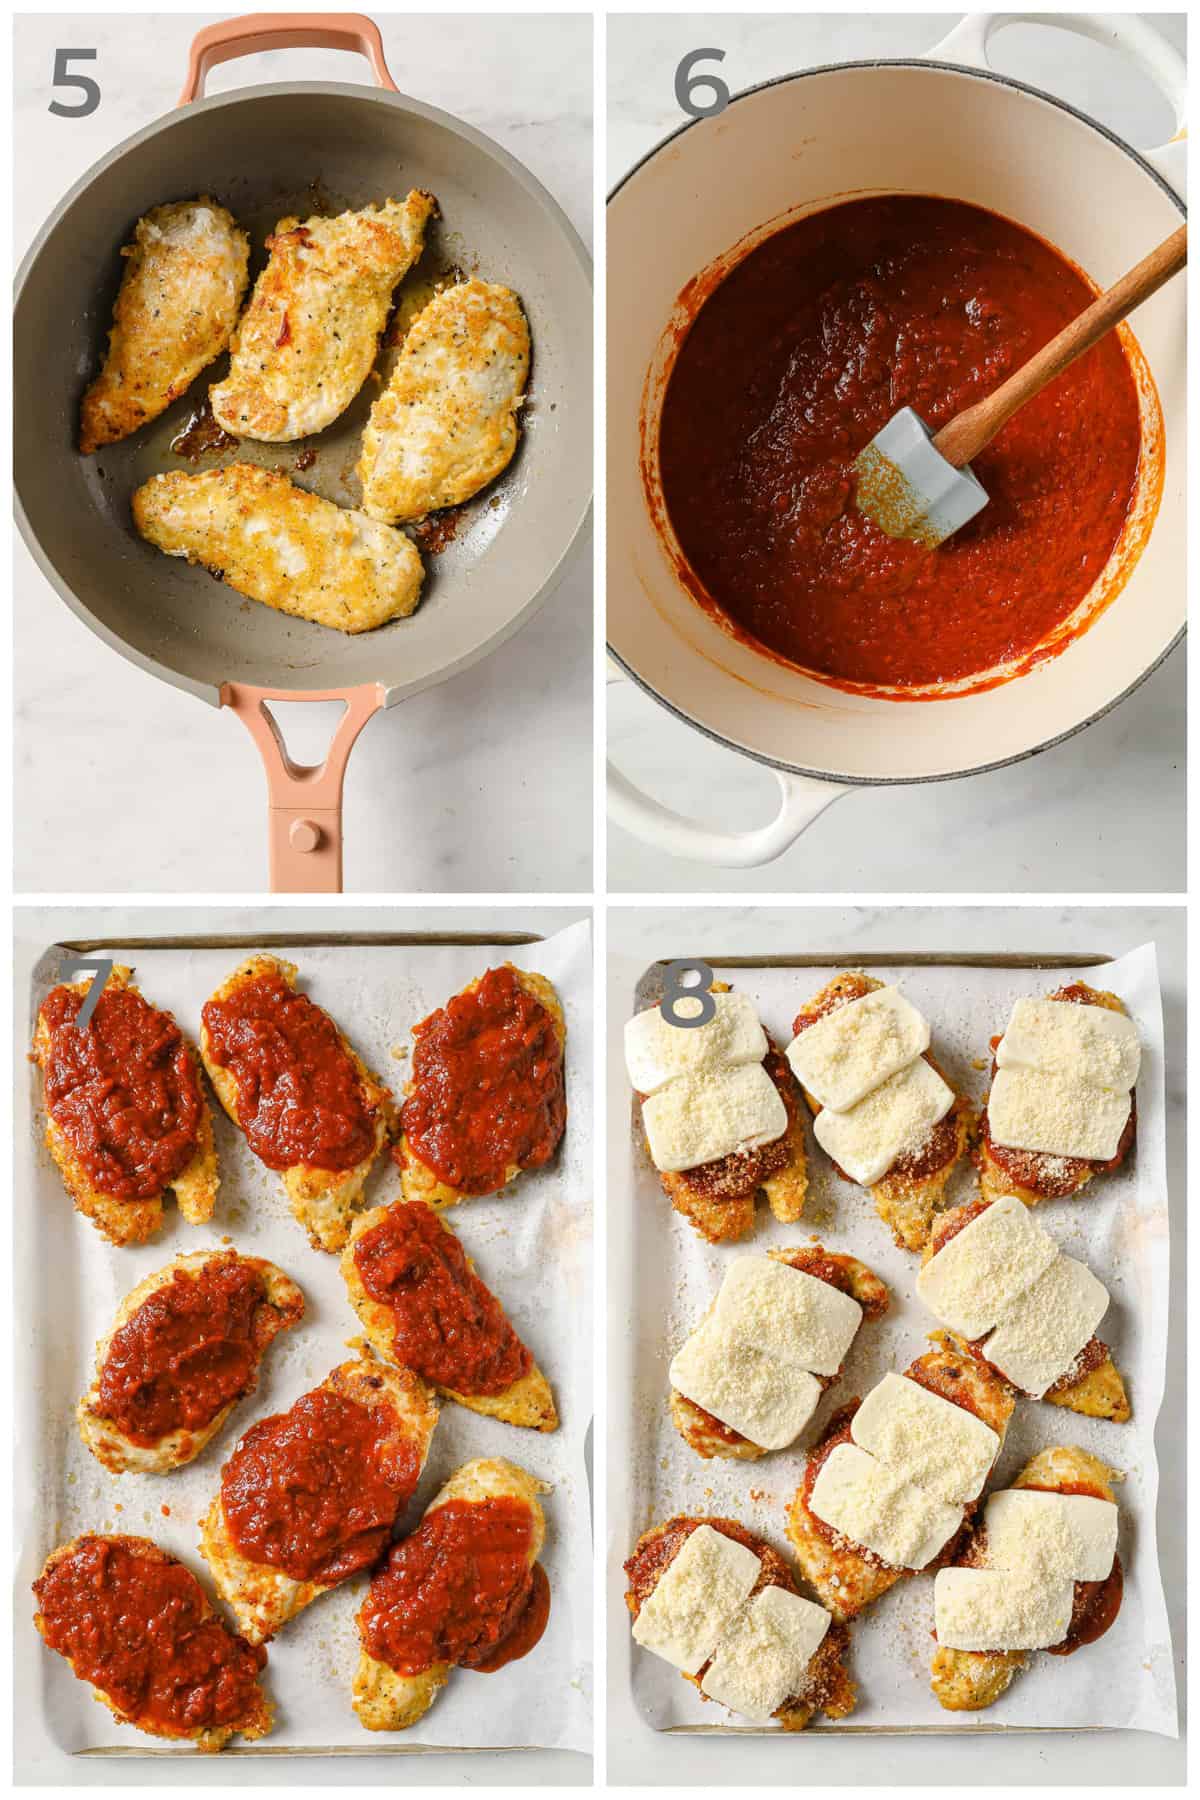 Step by step photos for how to pan-dry and then bake chicken parmesan.